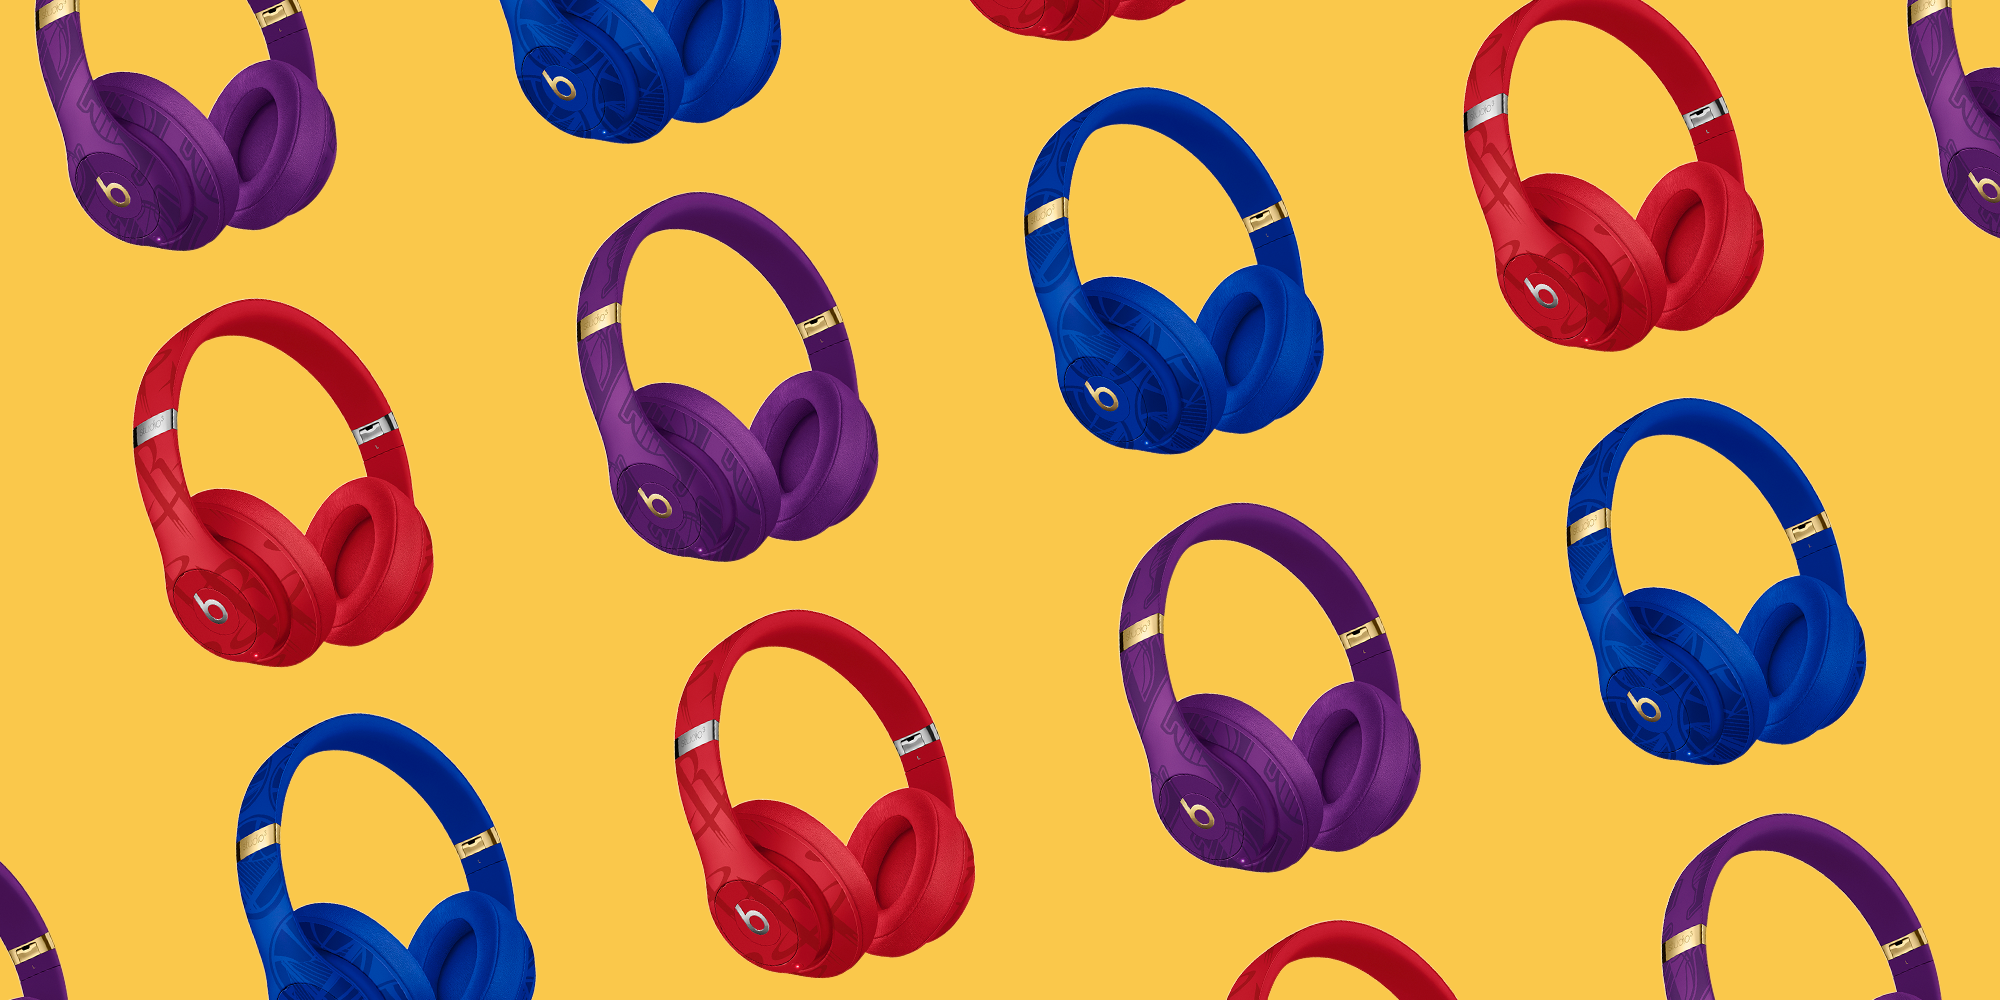 nba collection beats by dre